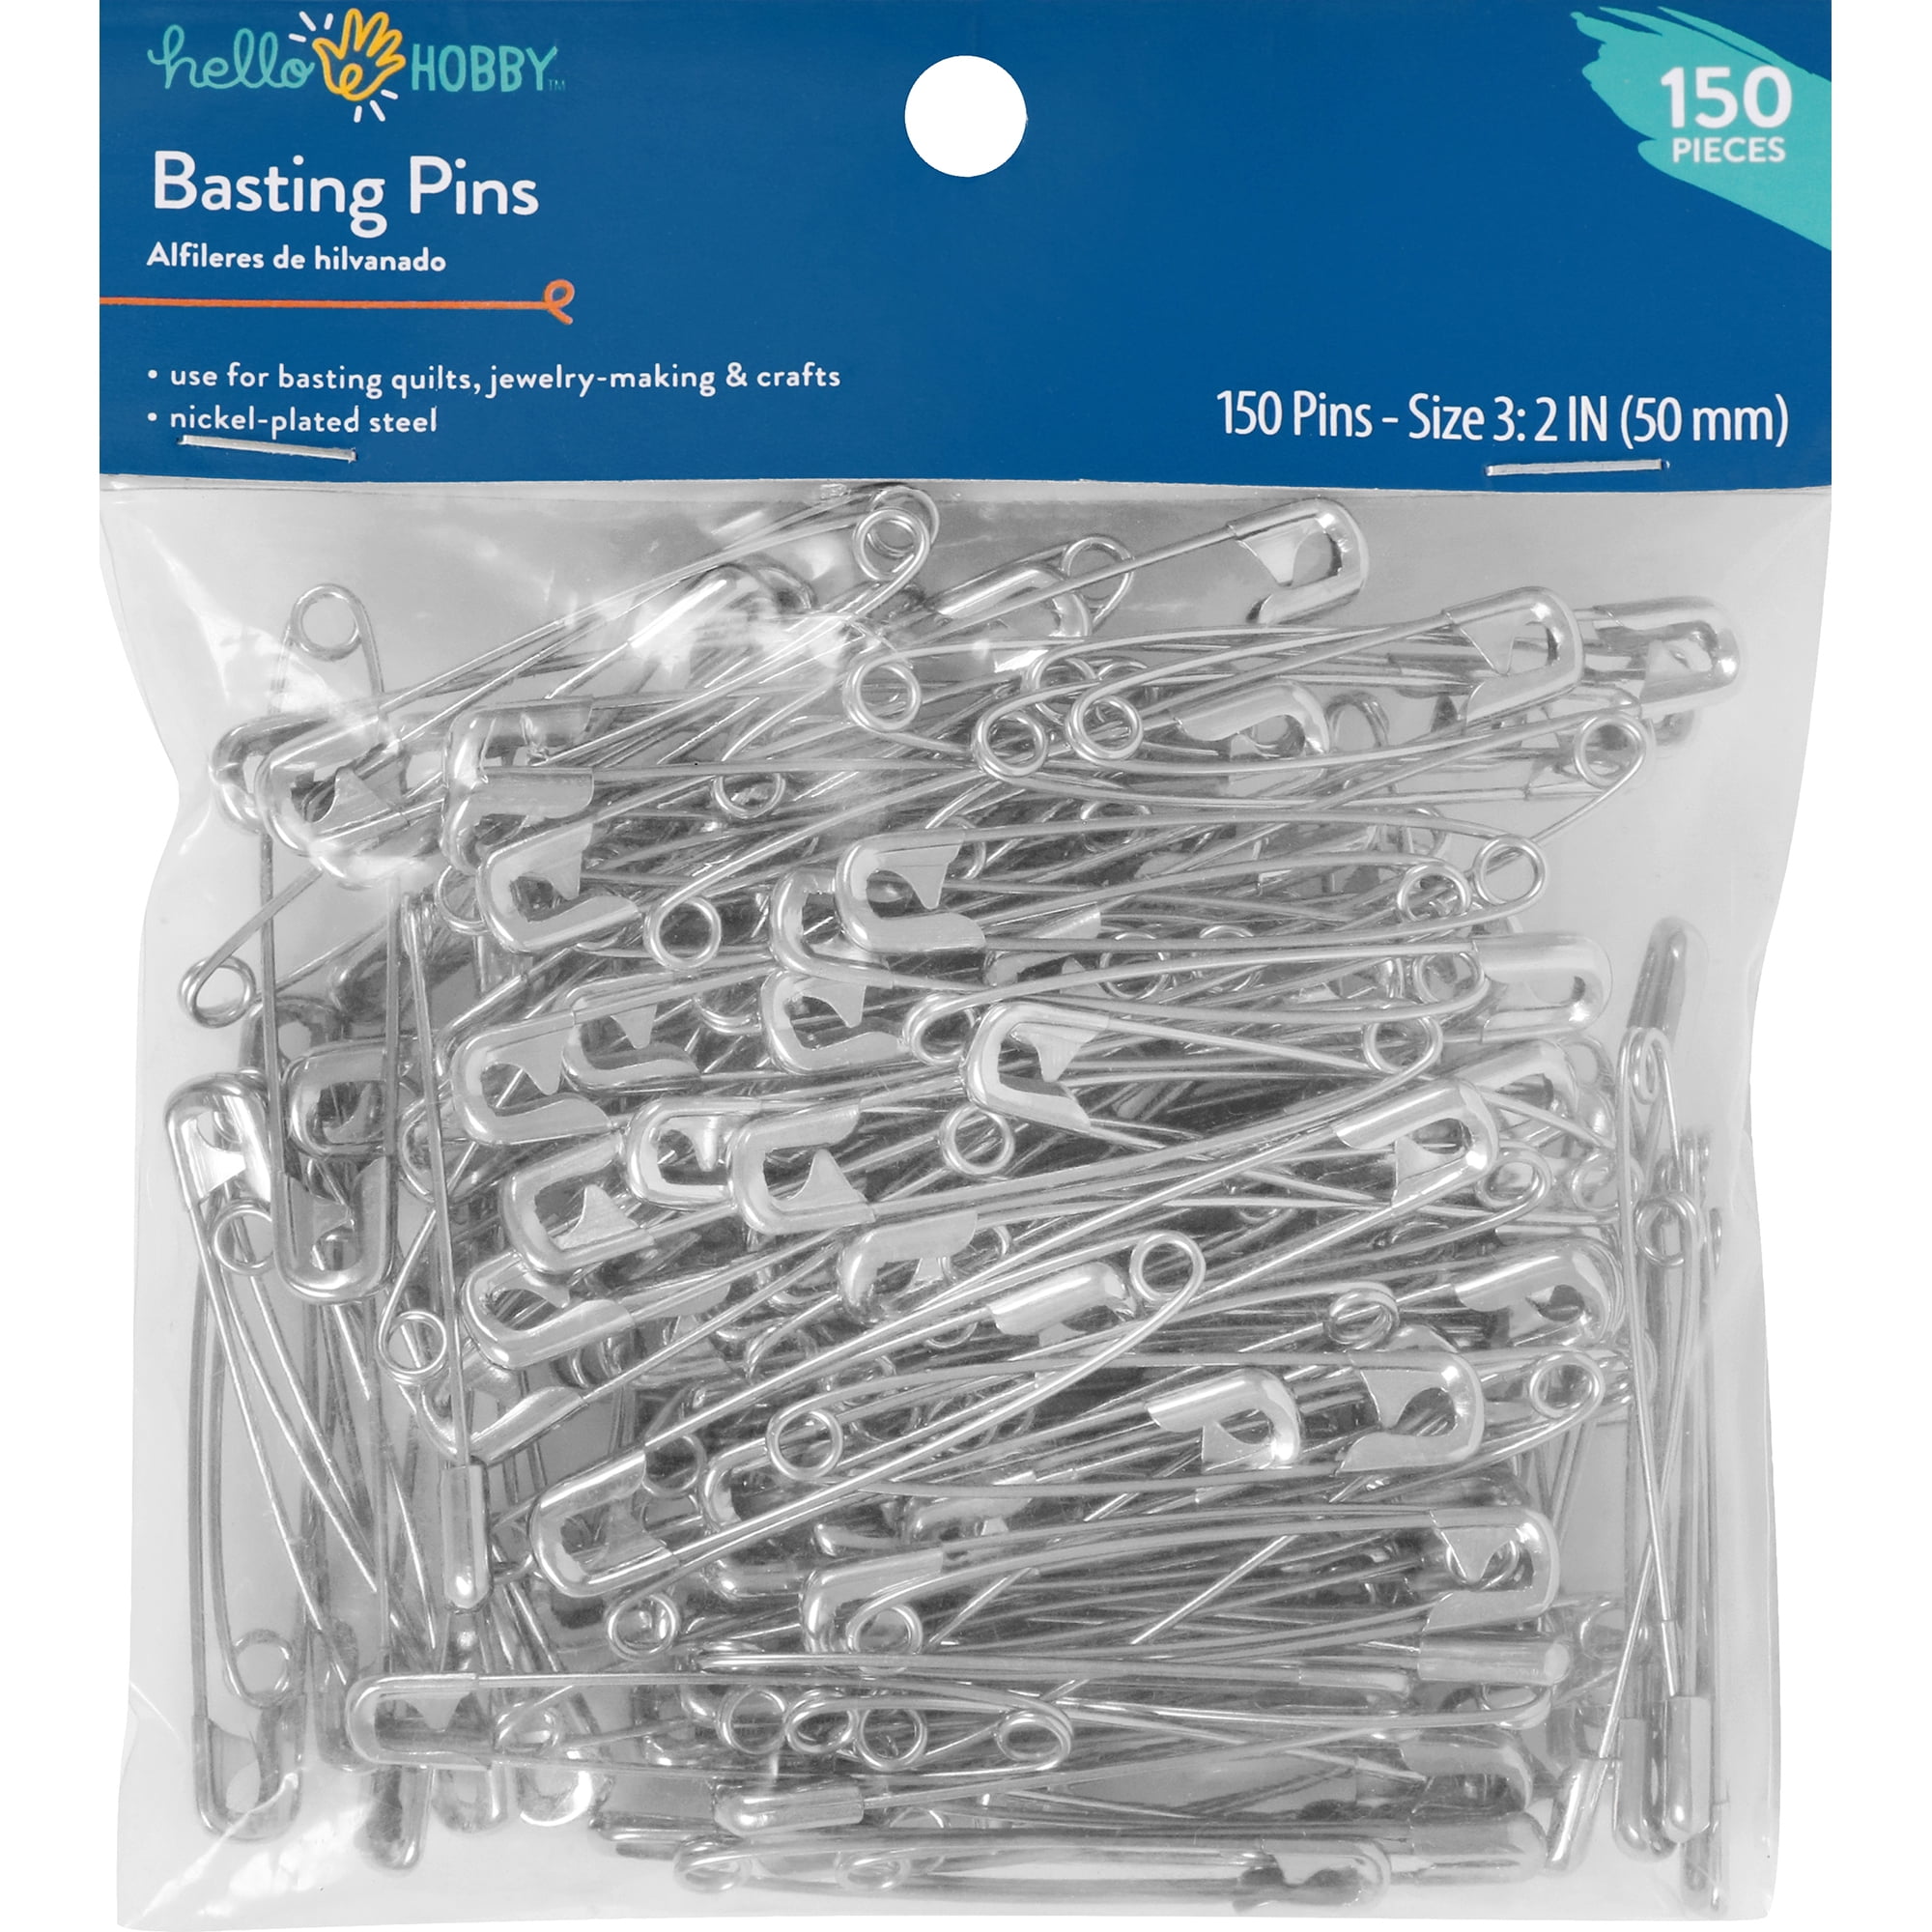 Quilting Curved Safety Pins for Quick Basting, Size 3 (2 inch), 90 Count